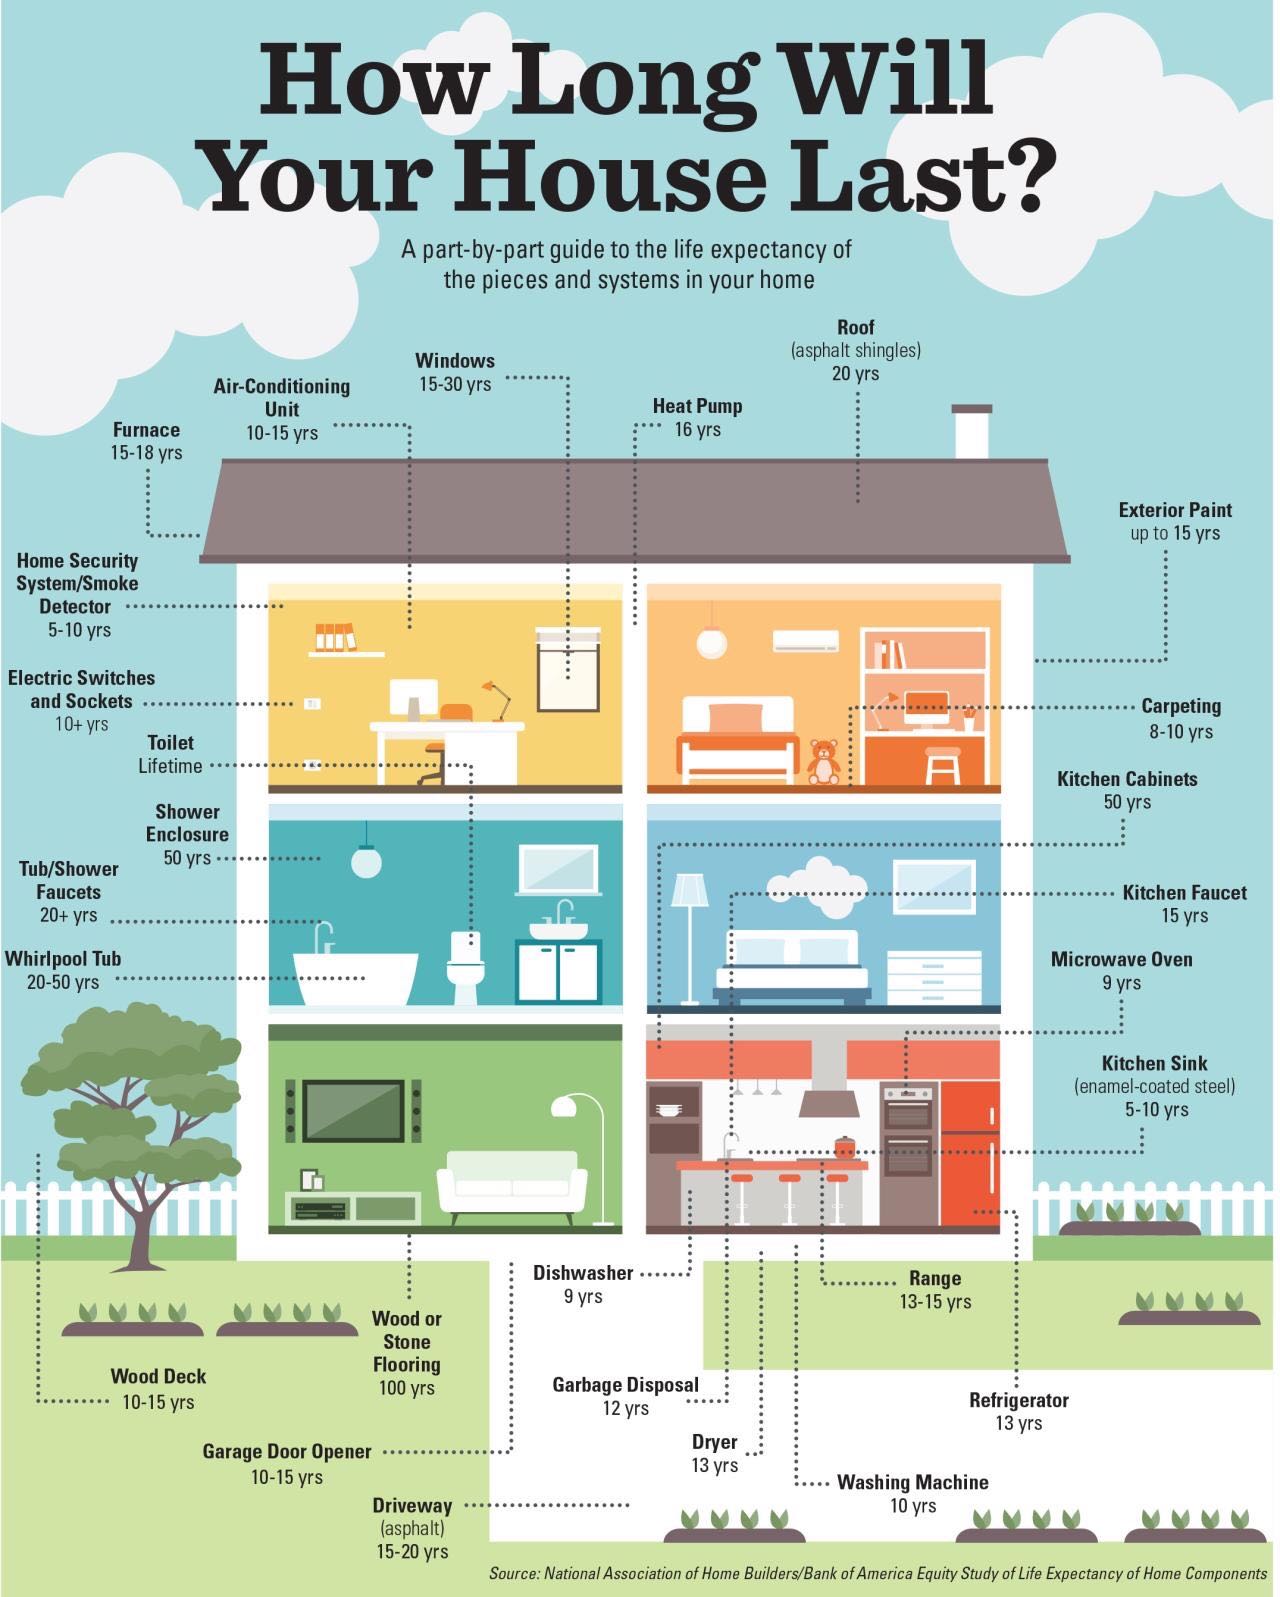 How Long Will Your House Last